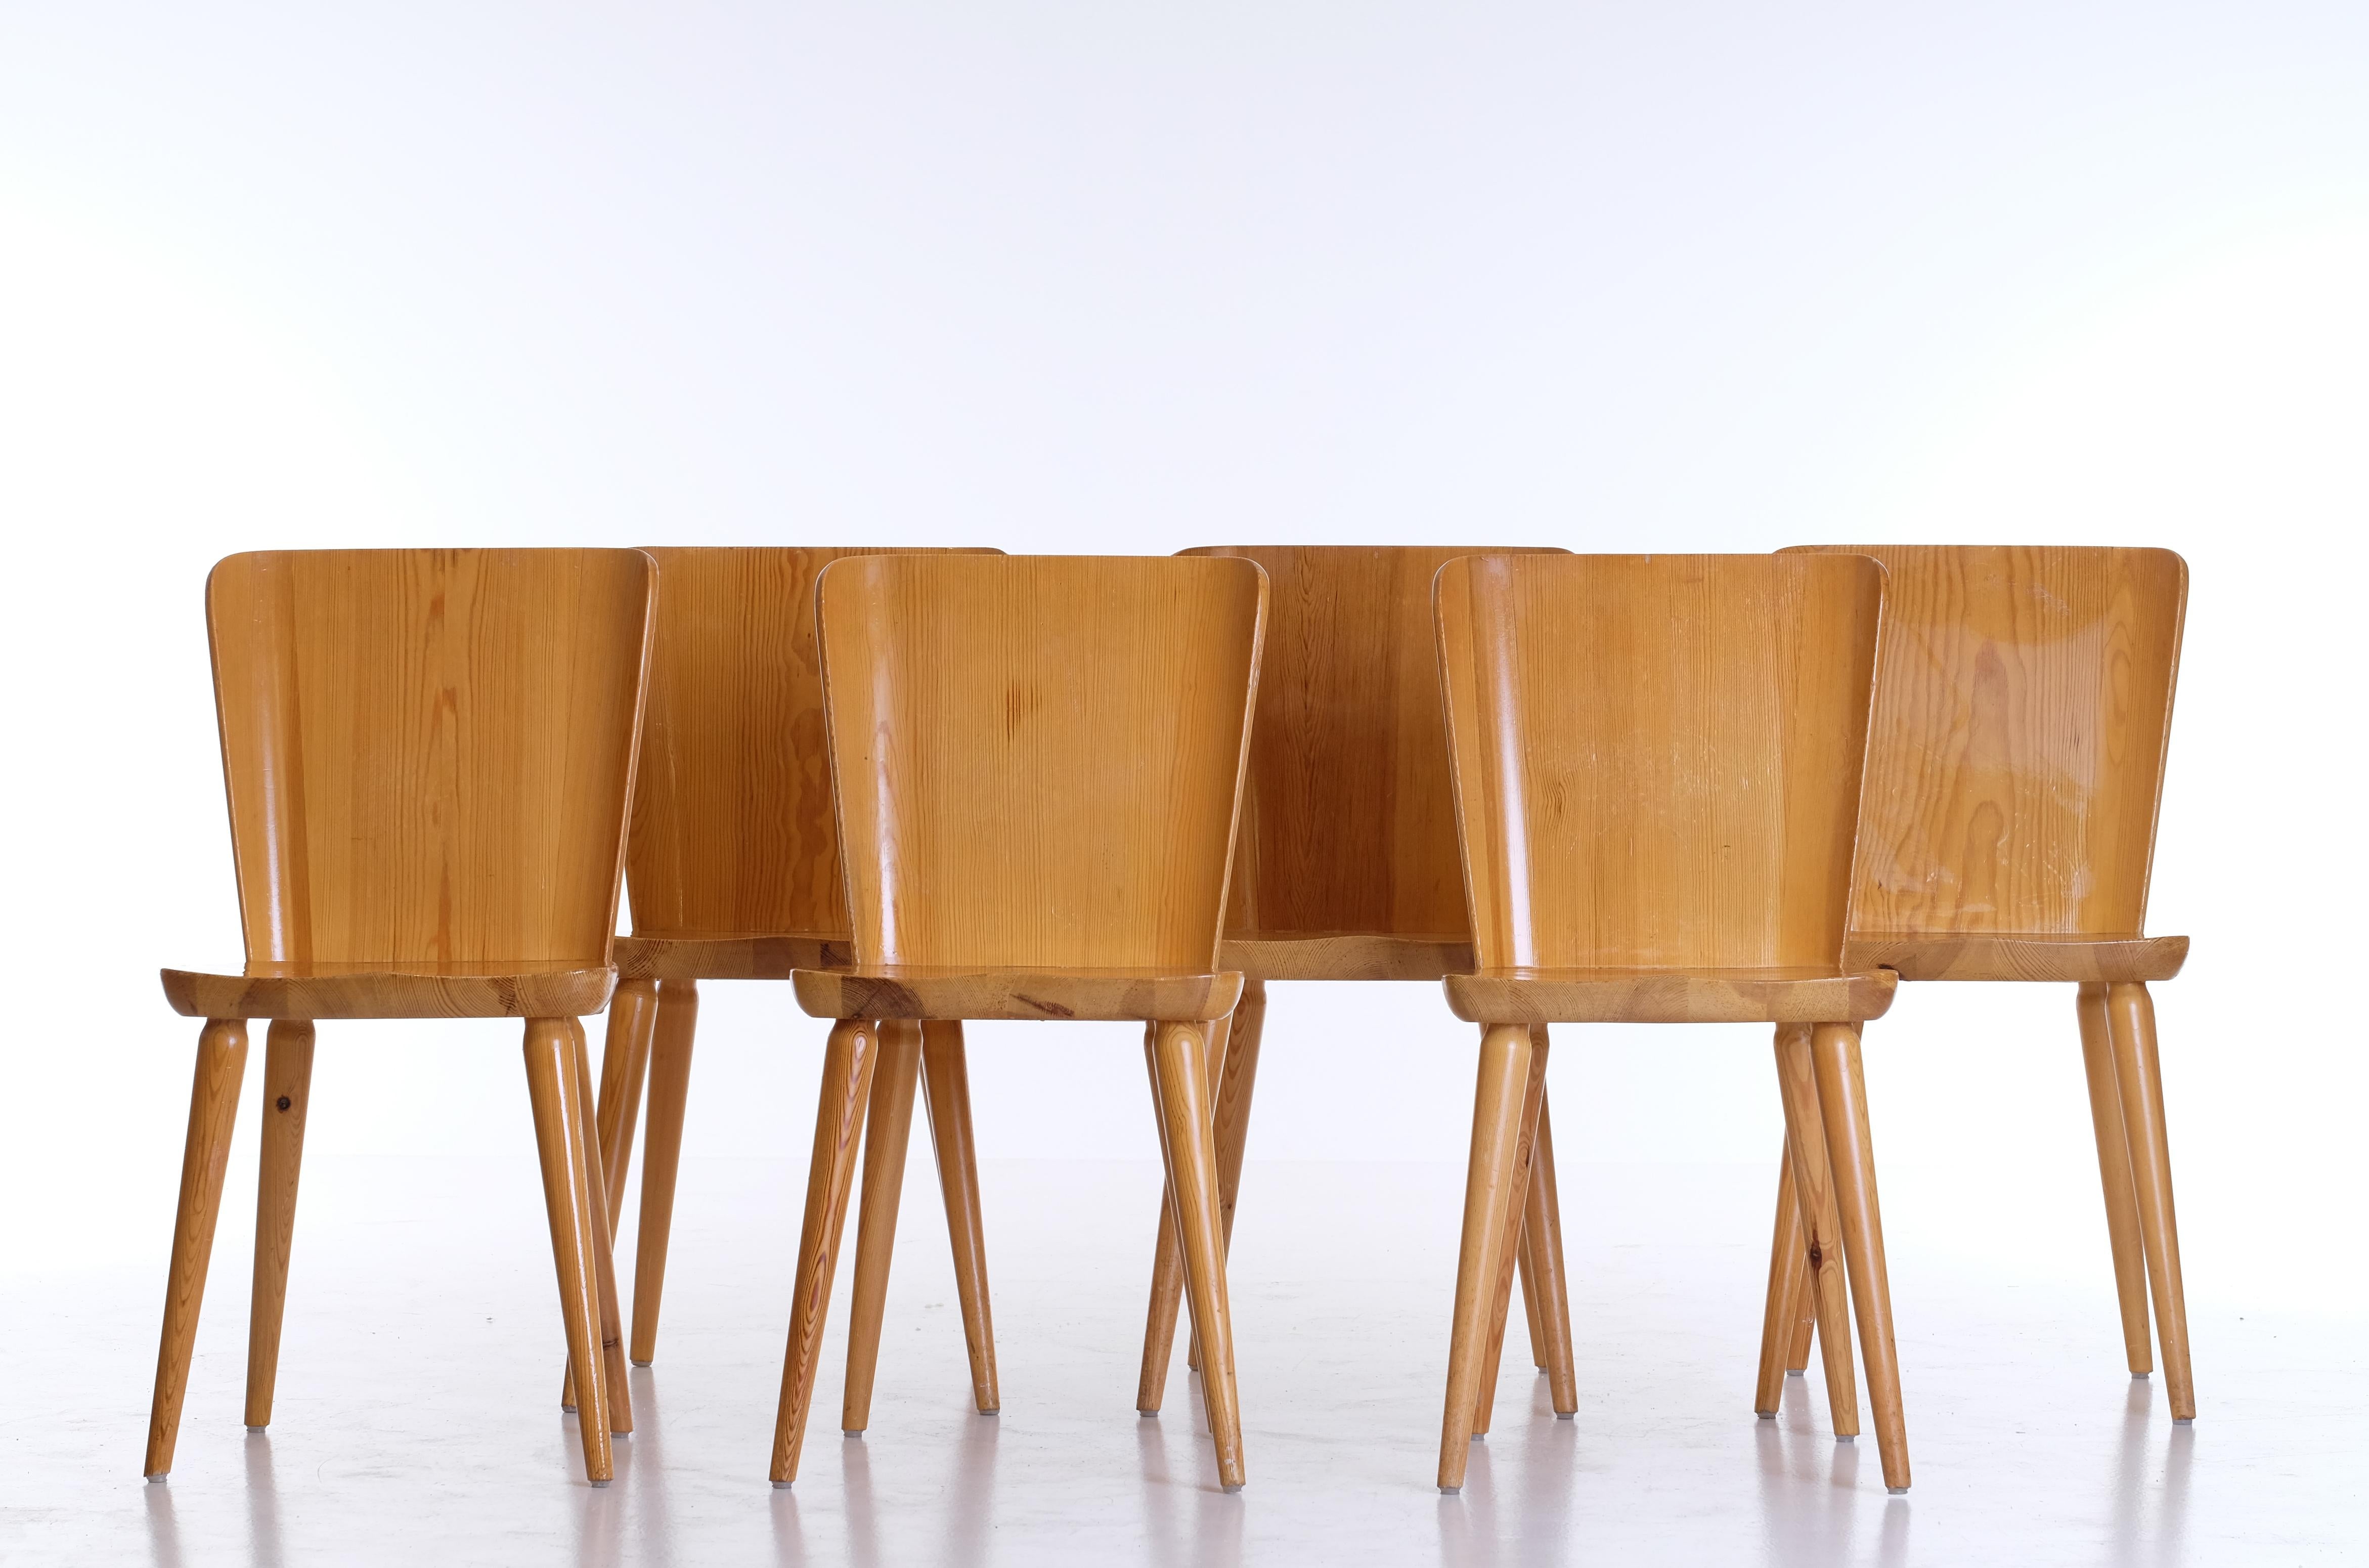 Mid-20th Century Set of 6 Swedish Pine Chairs by Göran Malmvall, Svensk Fur, 1960s For Sale